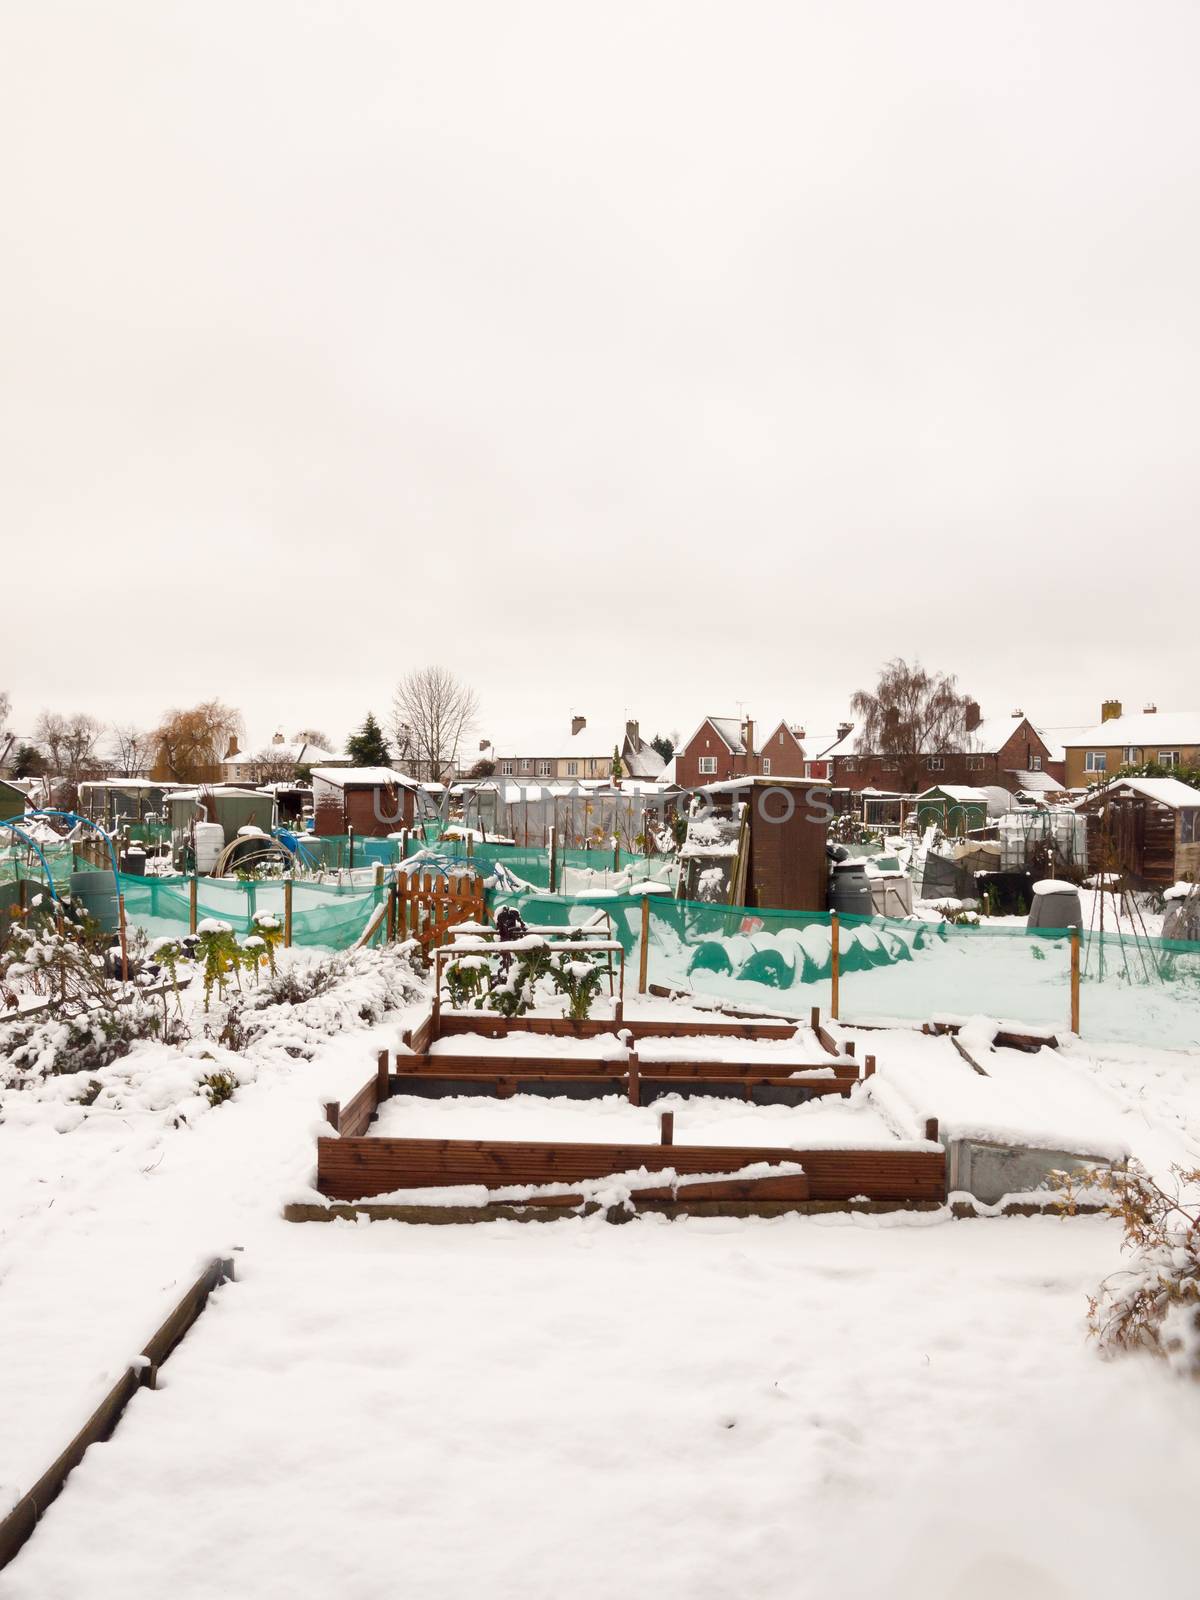 view of allotment covered in snow in winter by callumrc